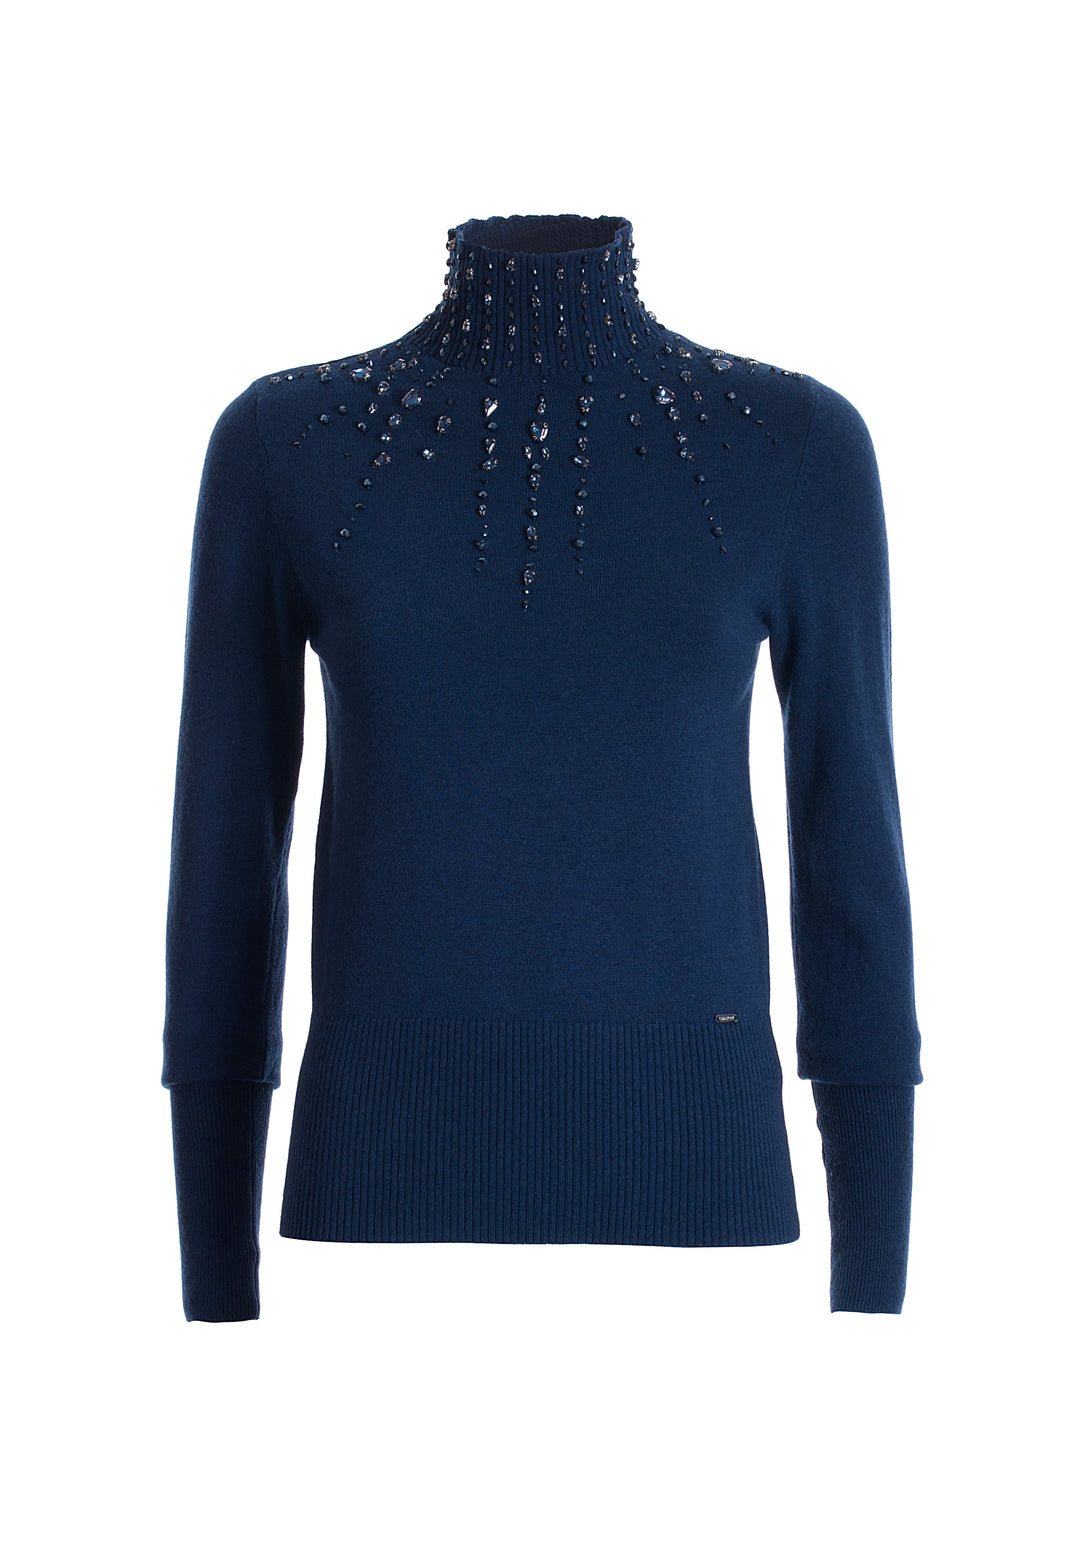 Knitwear tight fit with high neck